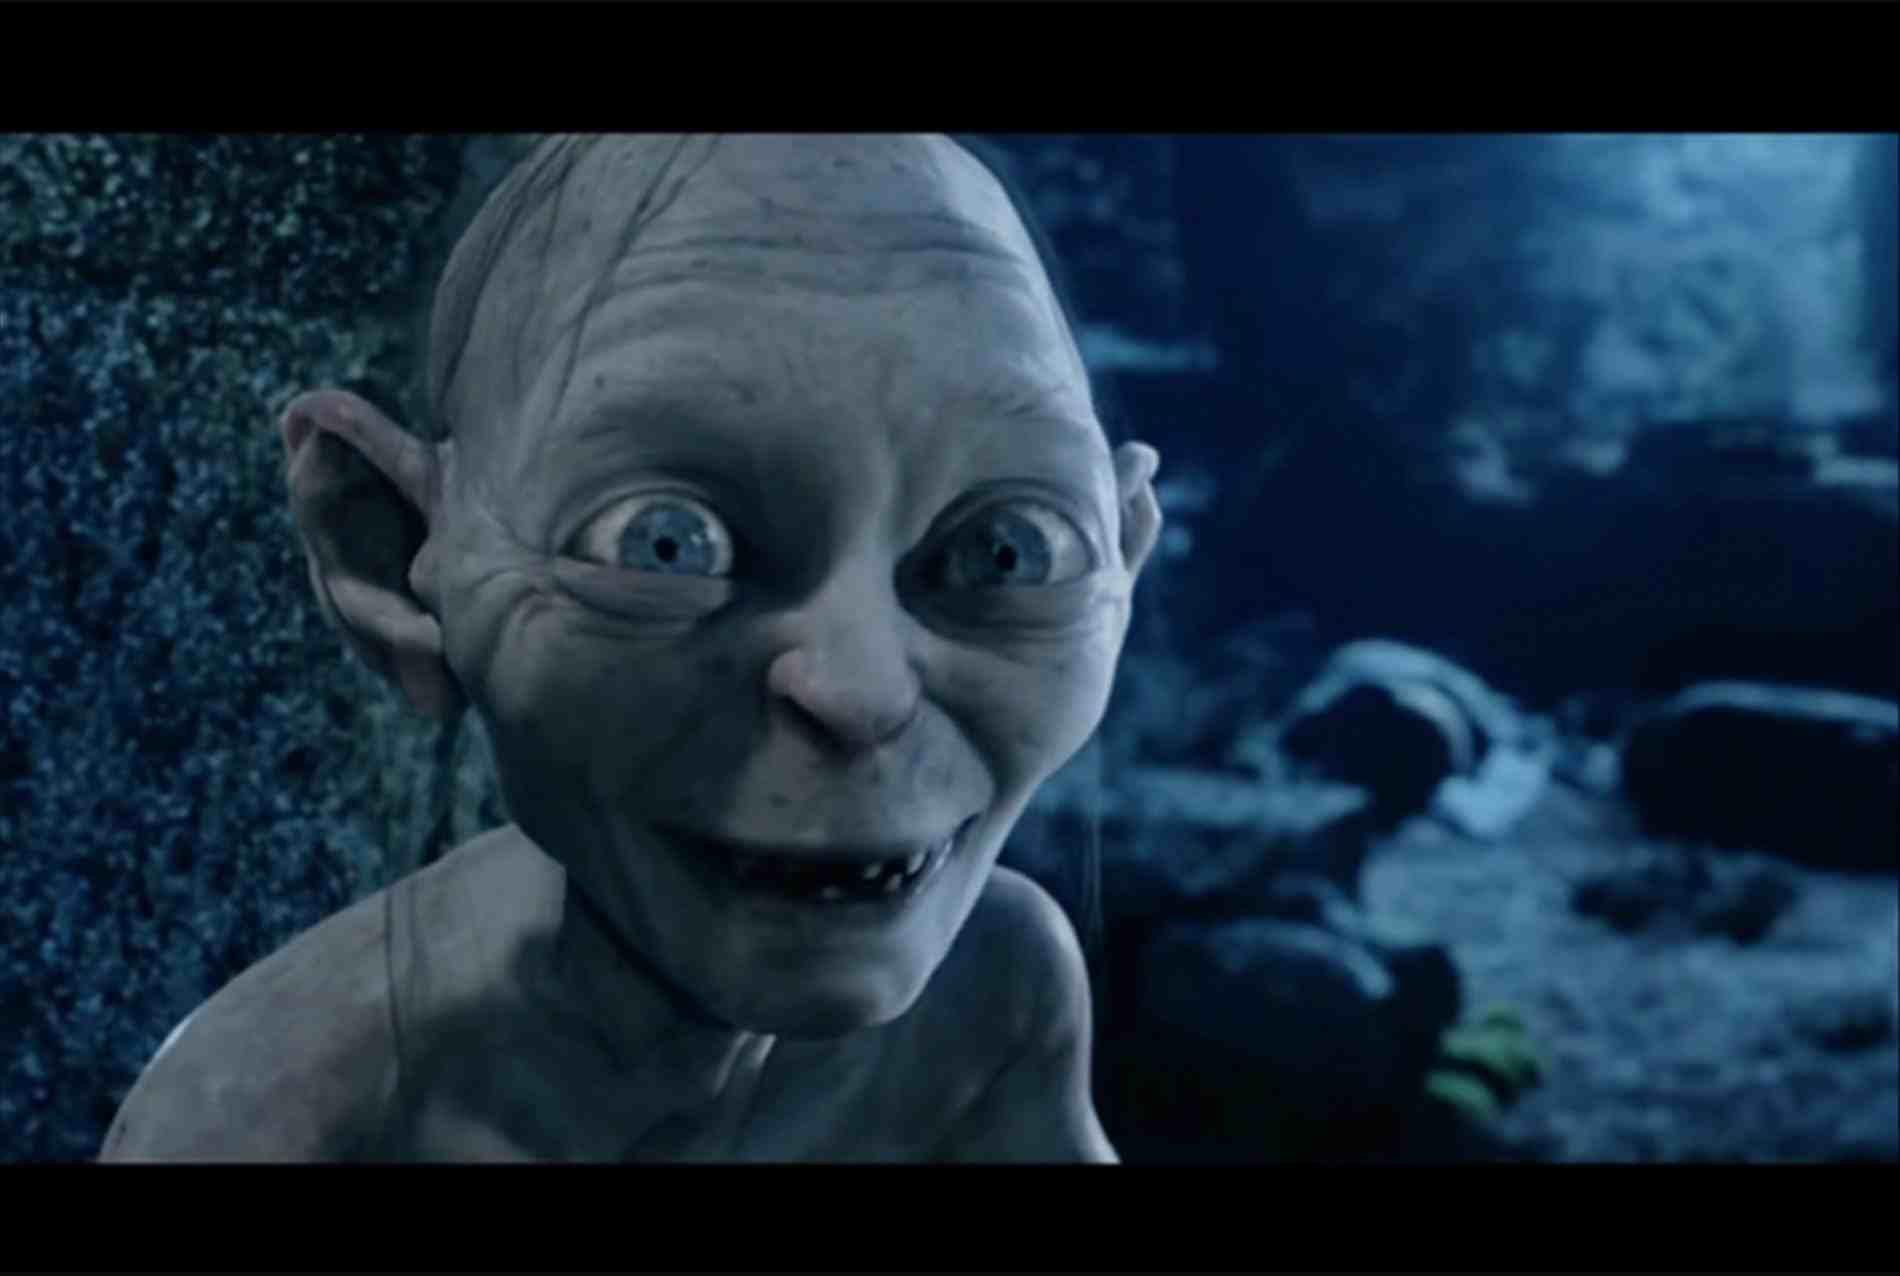 gollum lord of the rings toy